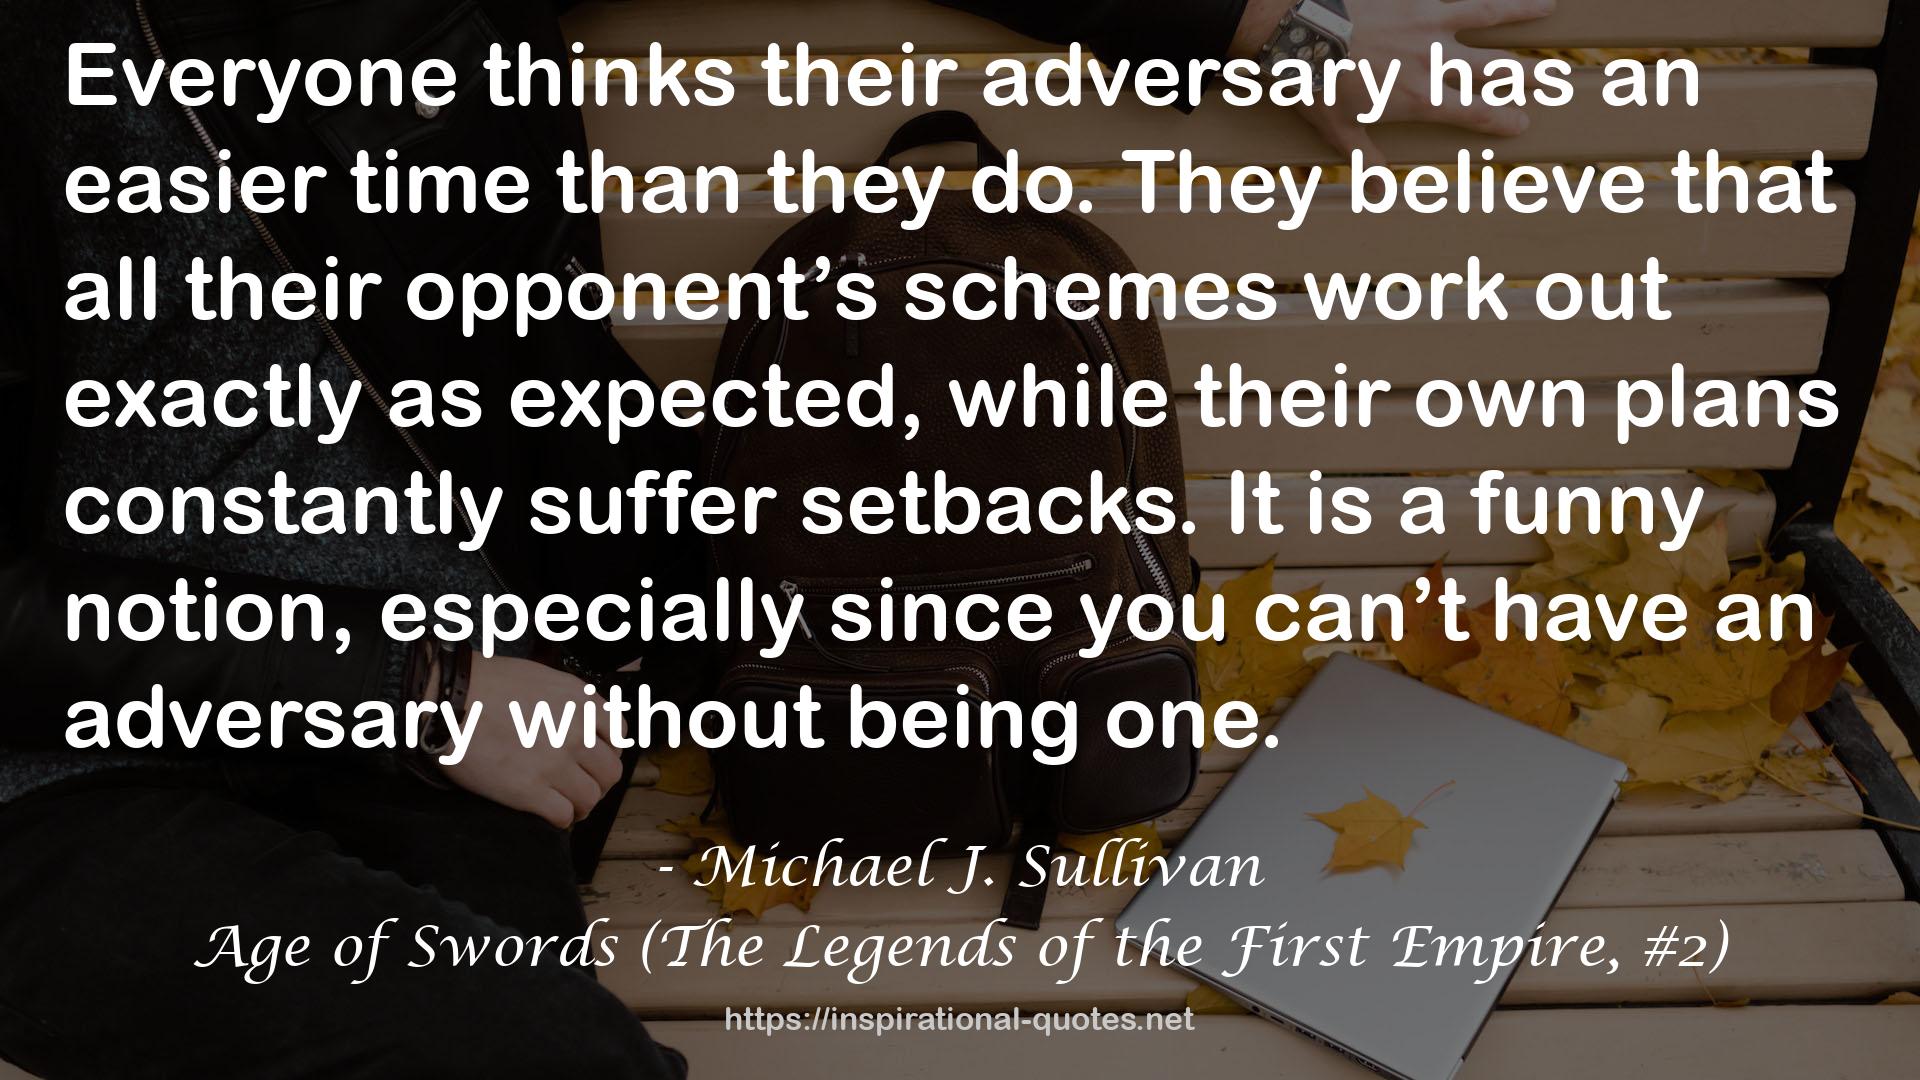 Age of Swords (The Legends of the First Empire, #2) QUOTES